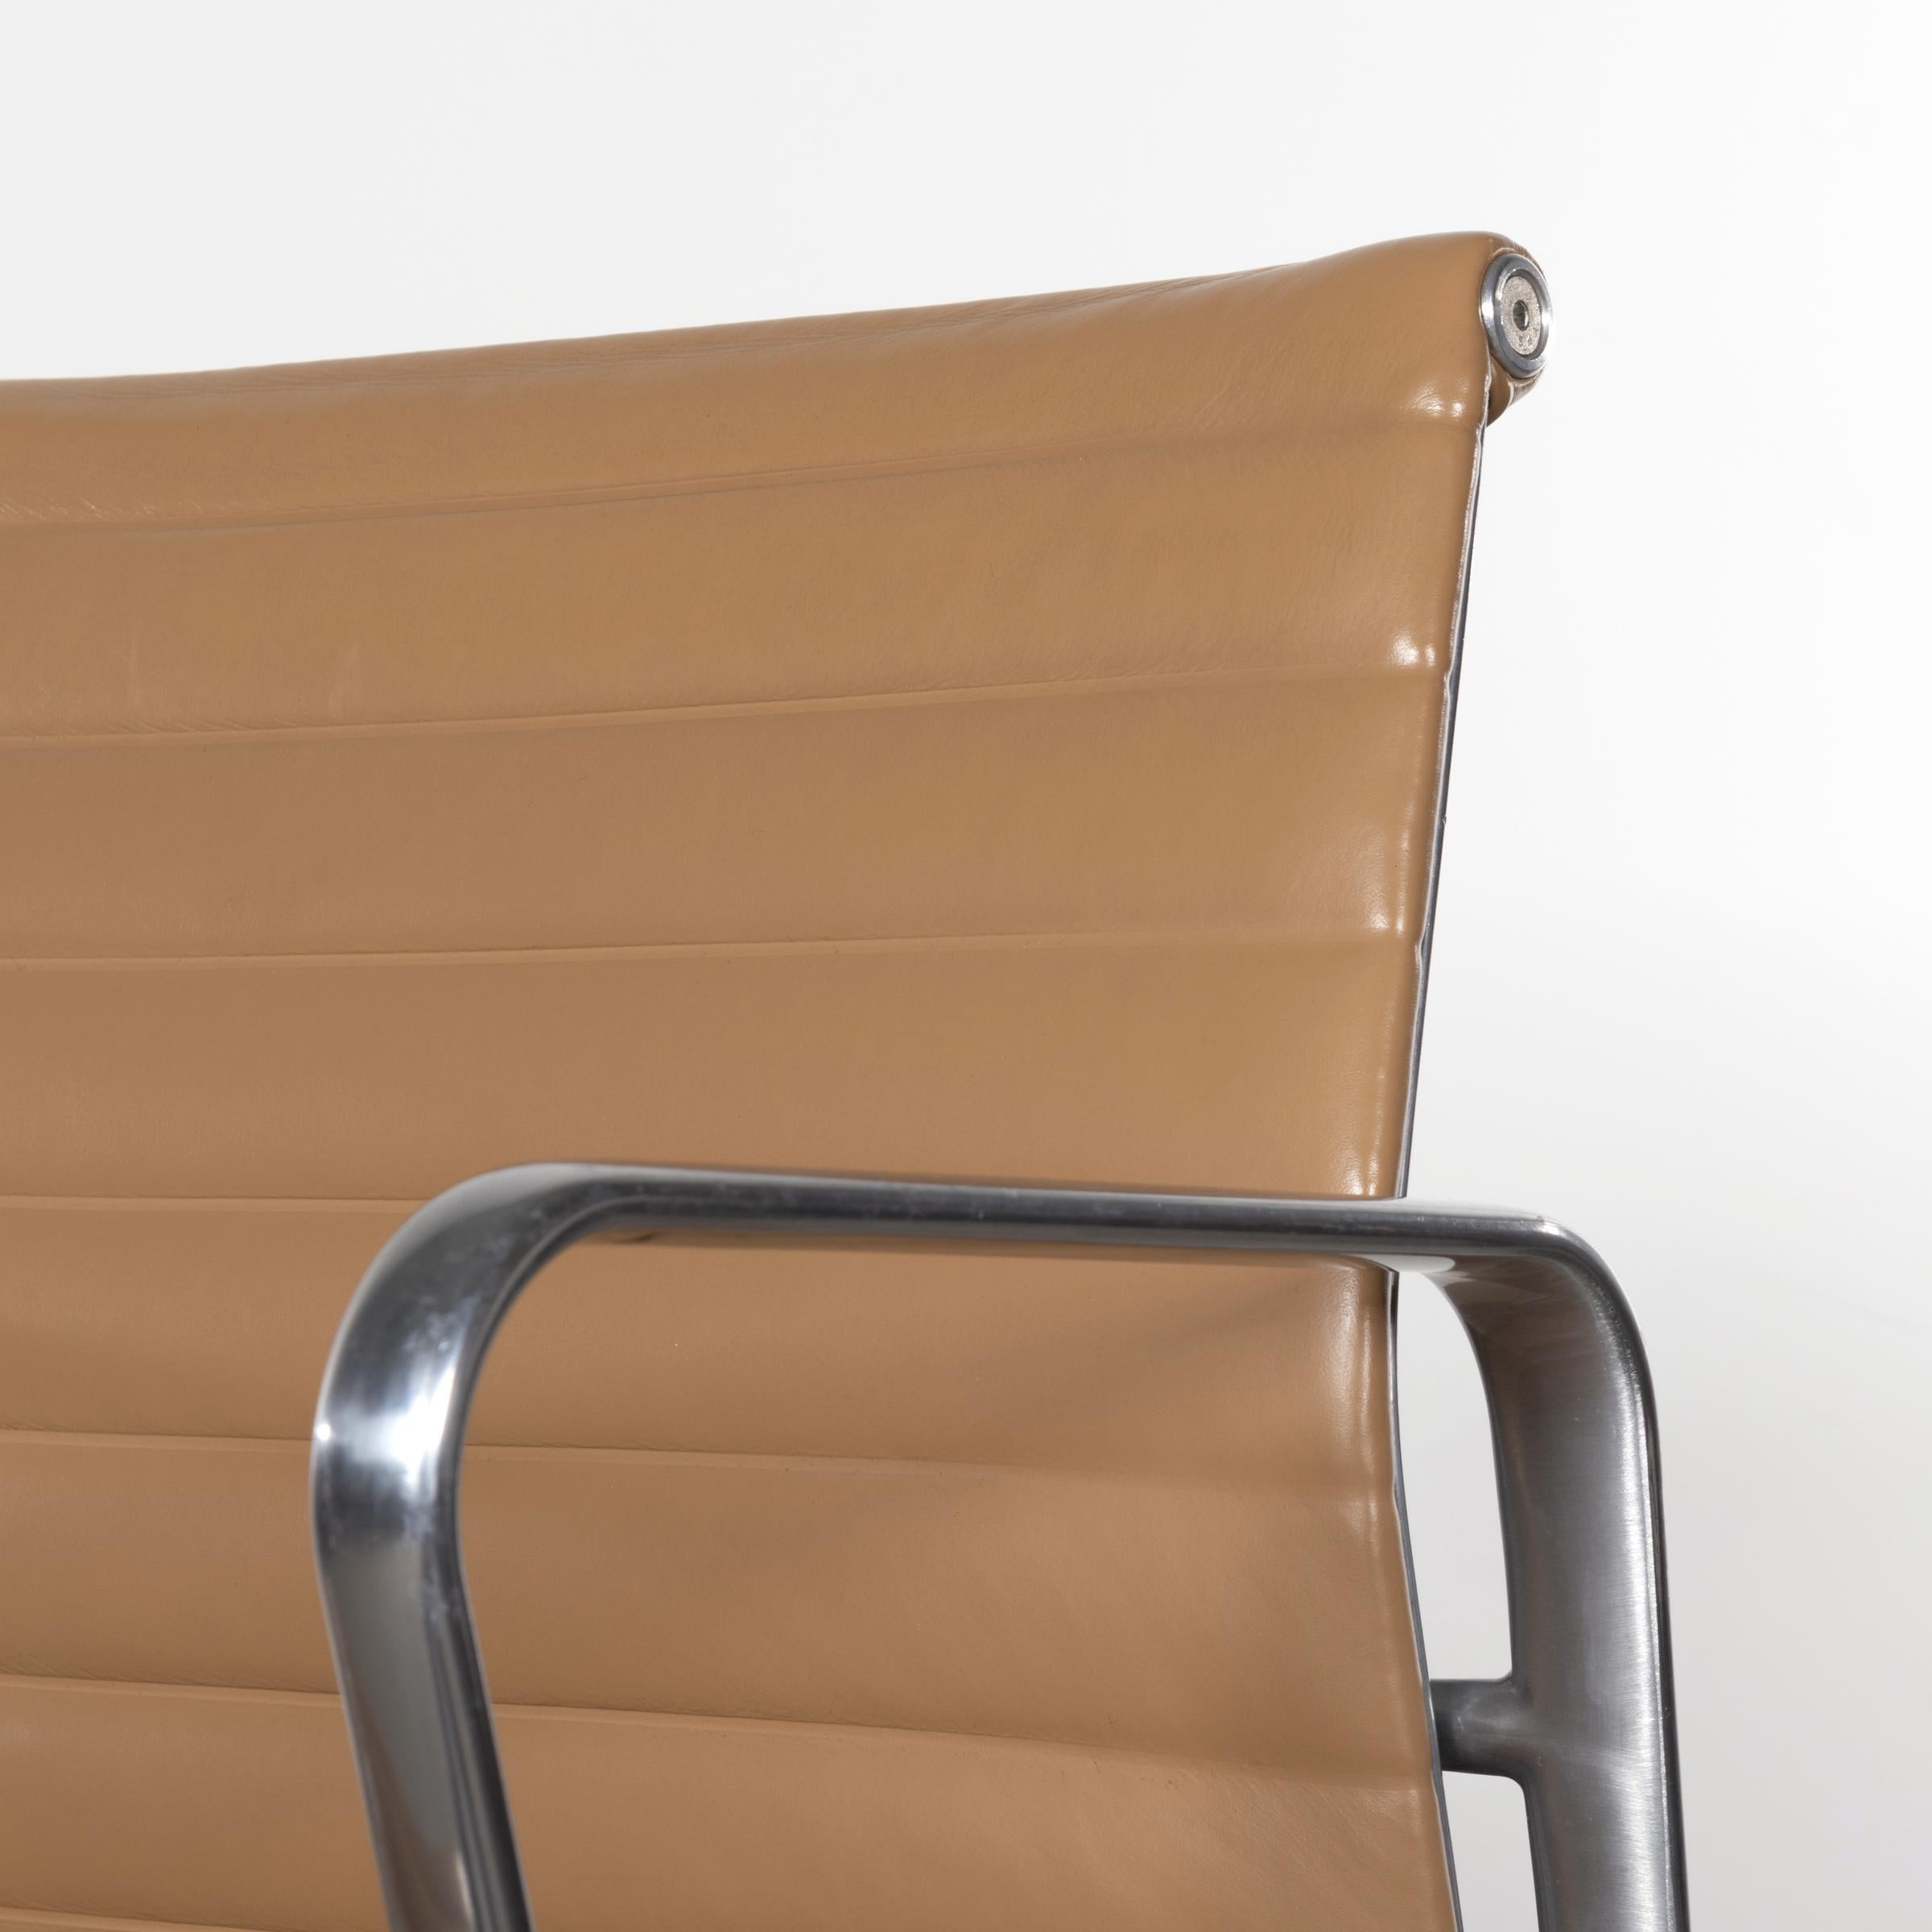 Aluminum Eames Management Office Chair in Cognac Leather for Herman Miller, USA